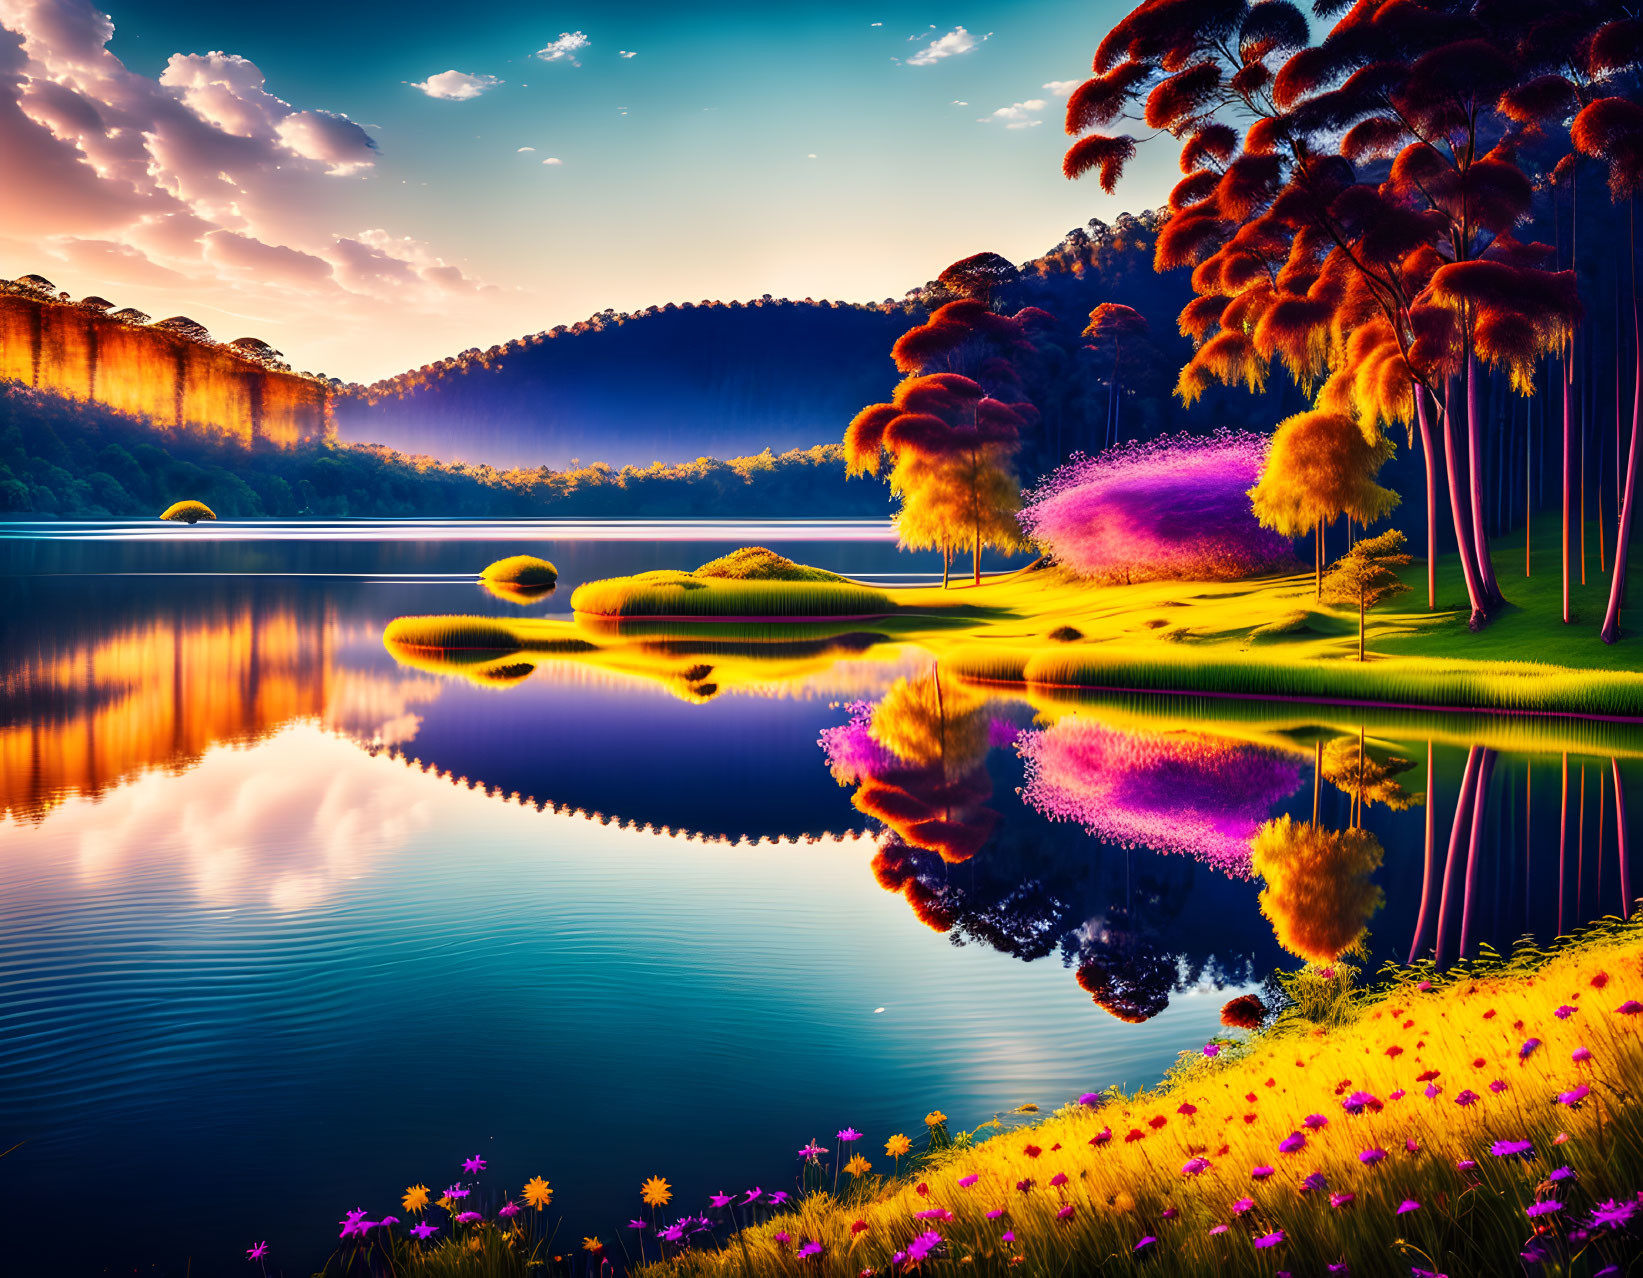 Colorful trees and mirror-like lake in surreal landscape